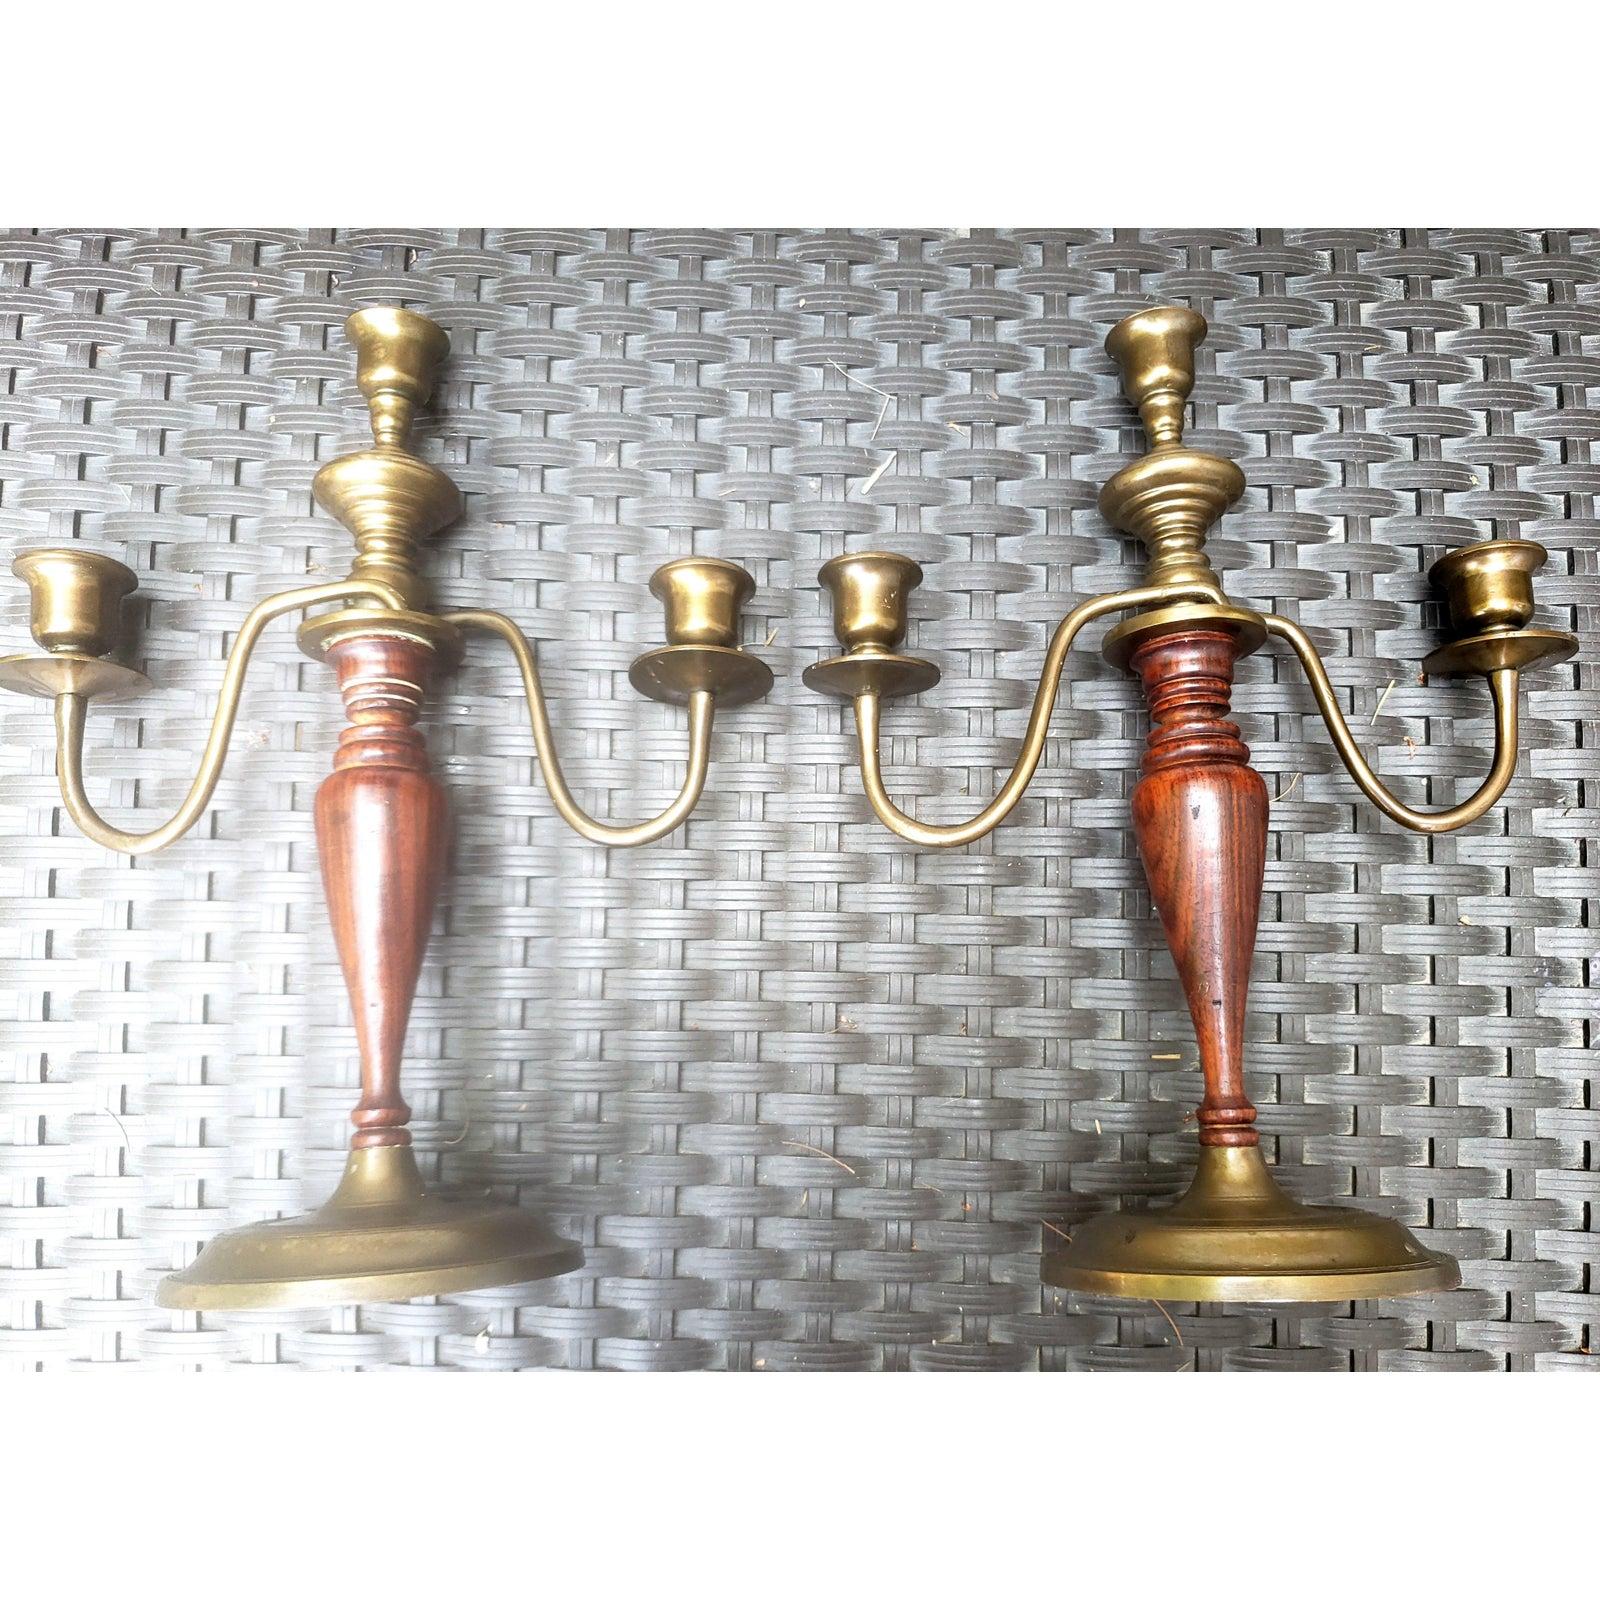 Hand-Crafted 19th Century Mahogany and Brass Candelabras, a Pair For Sale